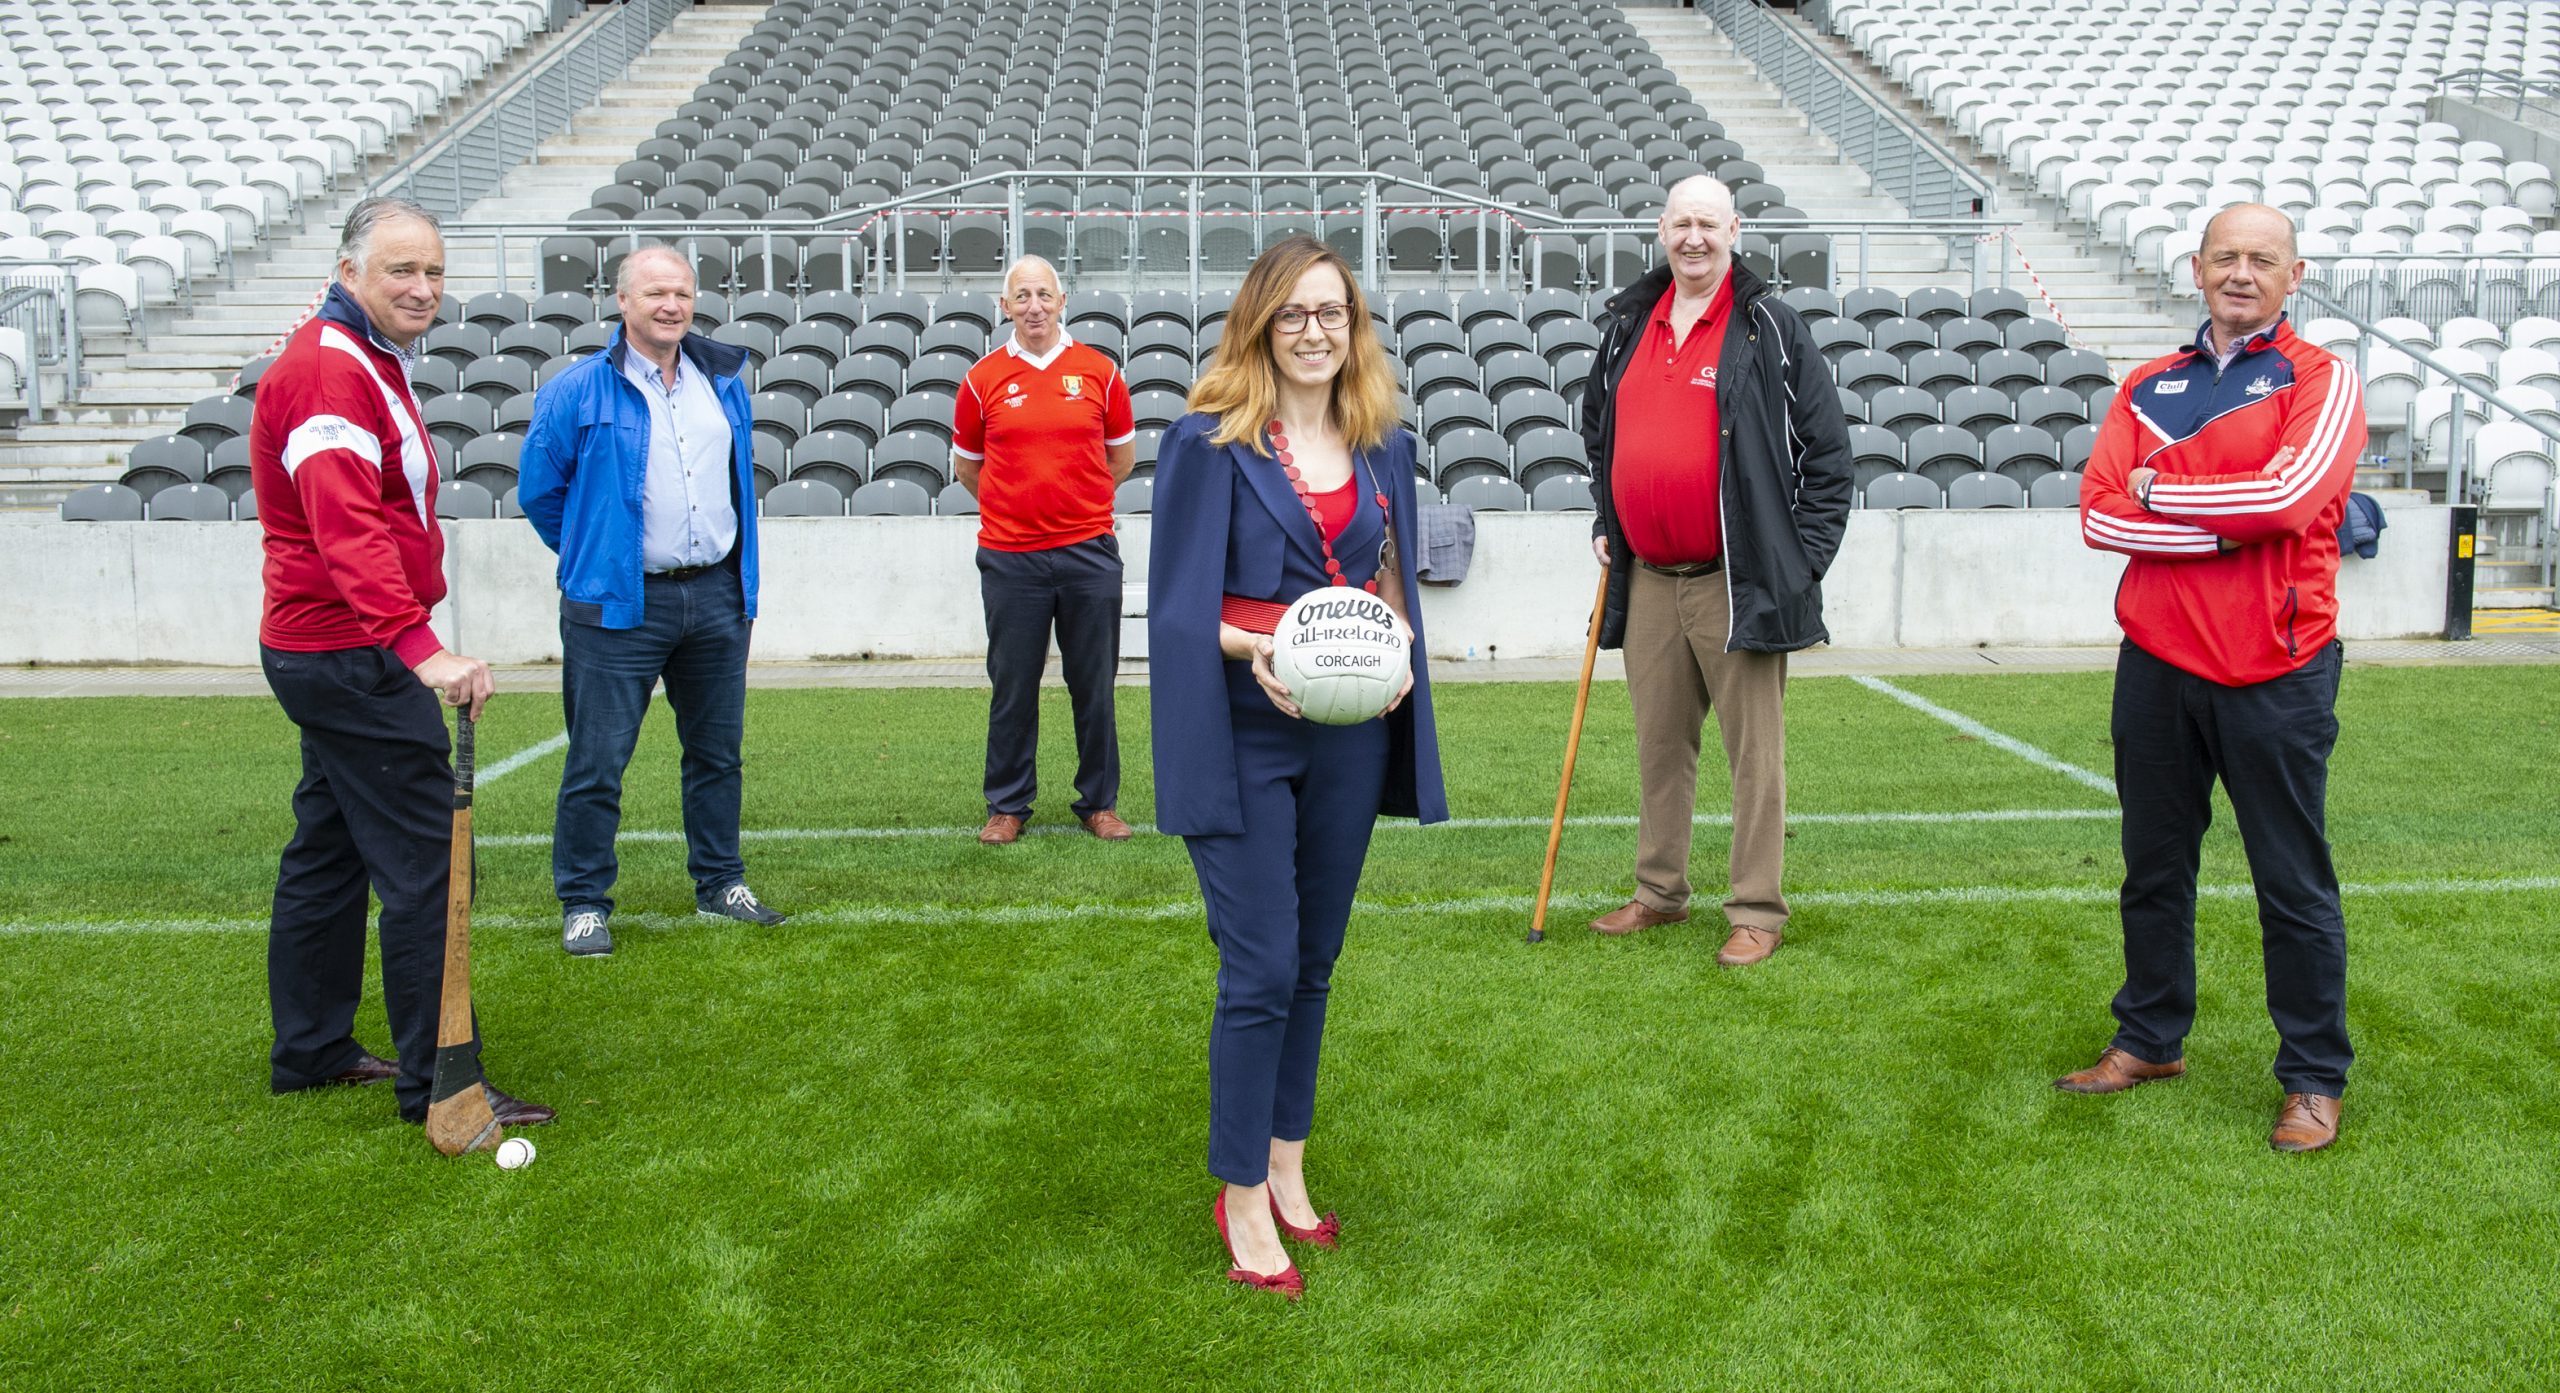 Cork GAA and Marymount Hospice are calling on people GO RED for Cork